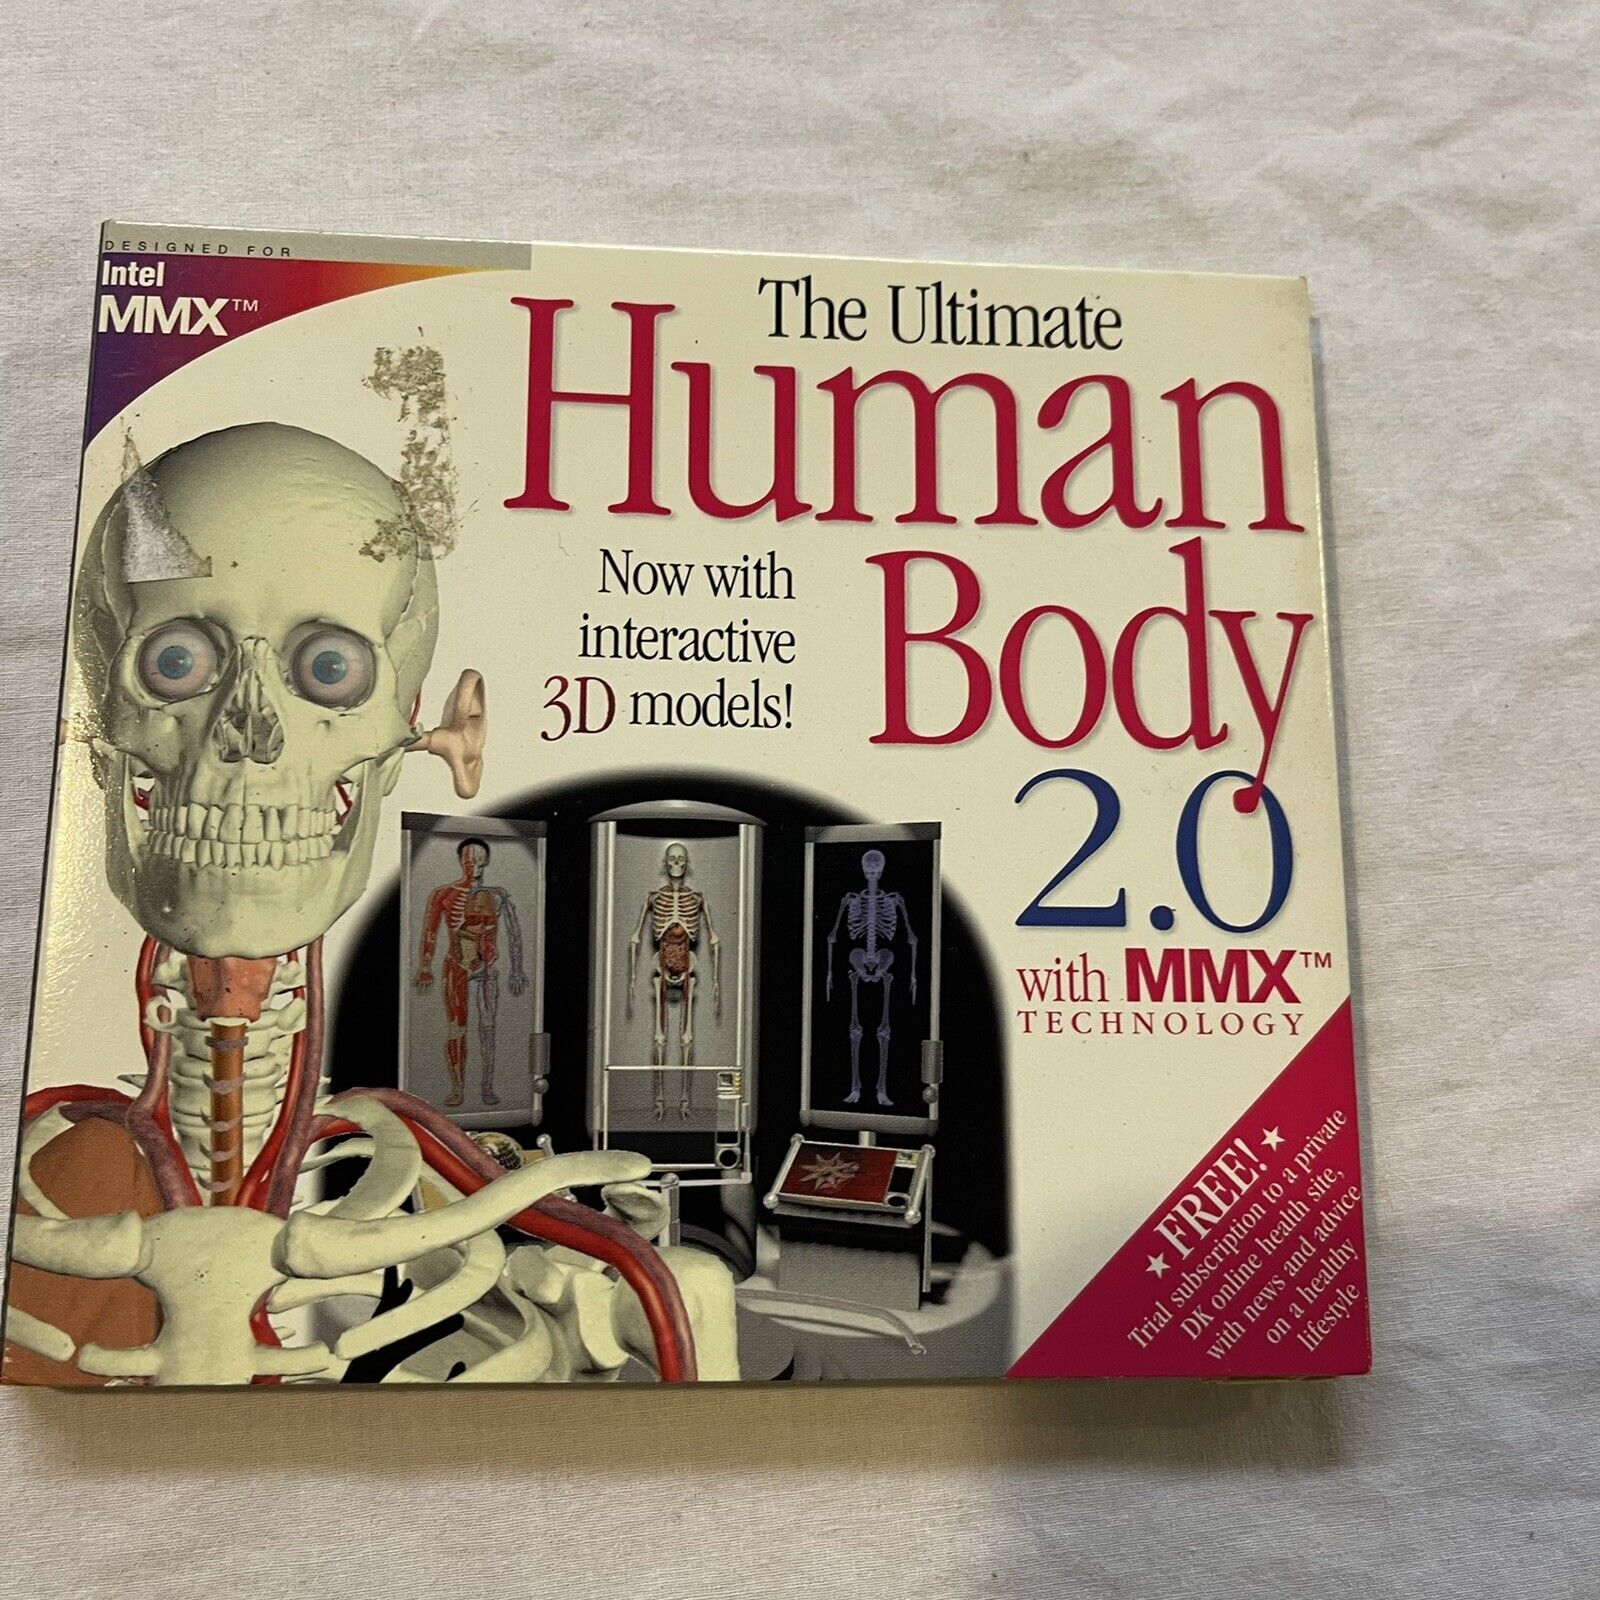 The Ultimate Human Body 2.0 by DK Multimedia for Windows CD-ROM